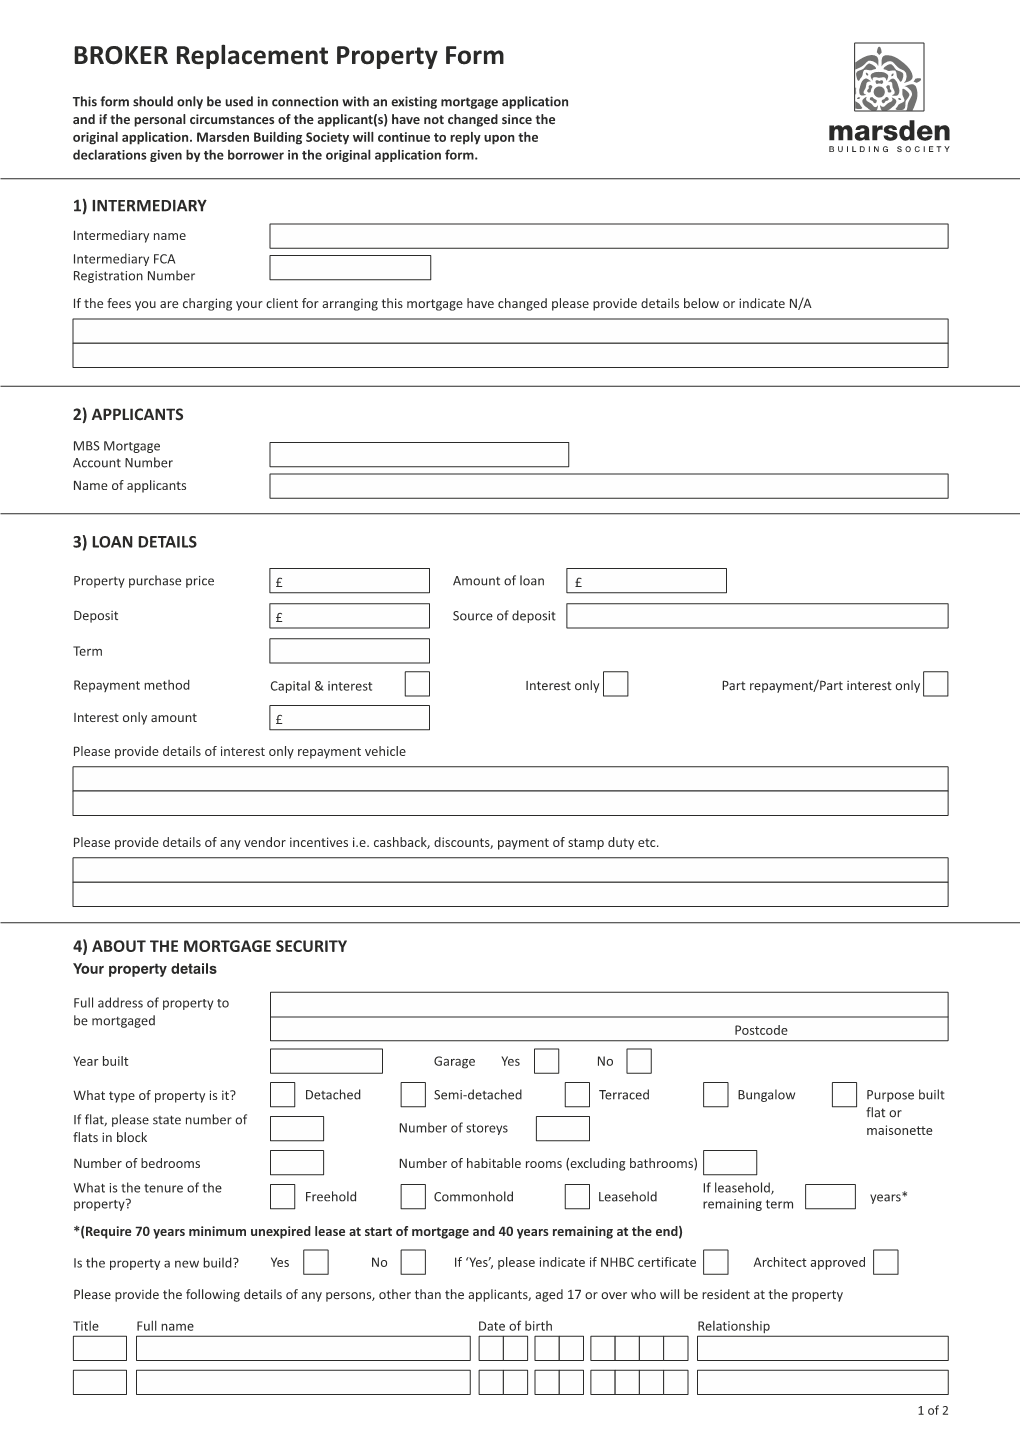 BROKER Replacement Property Form